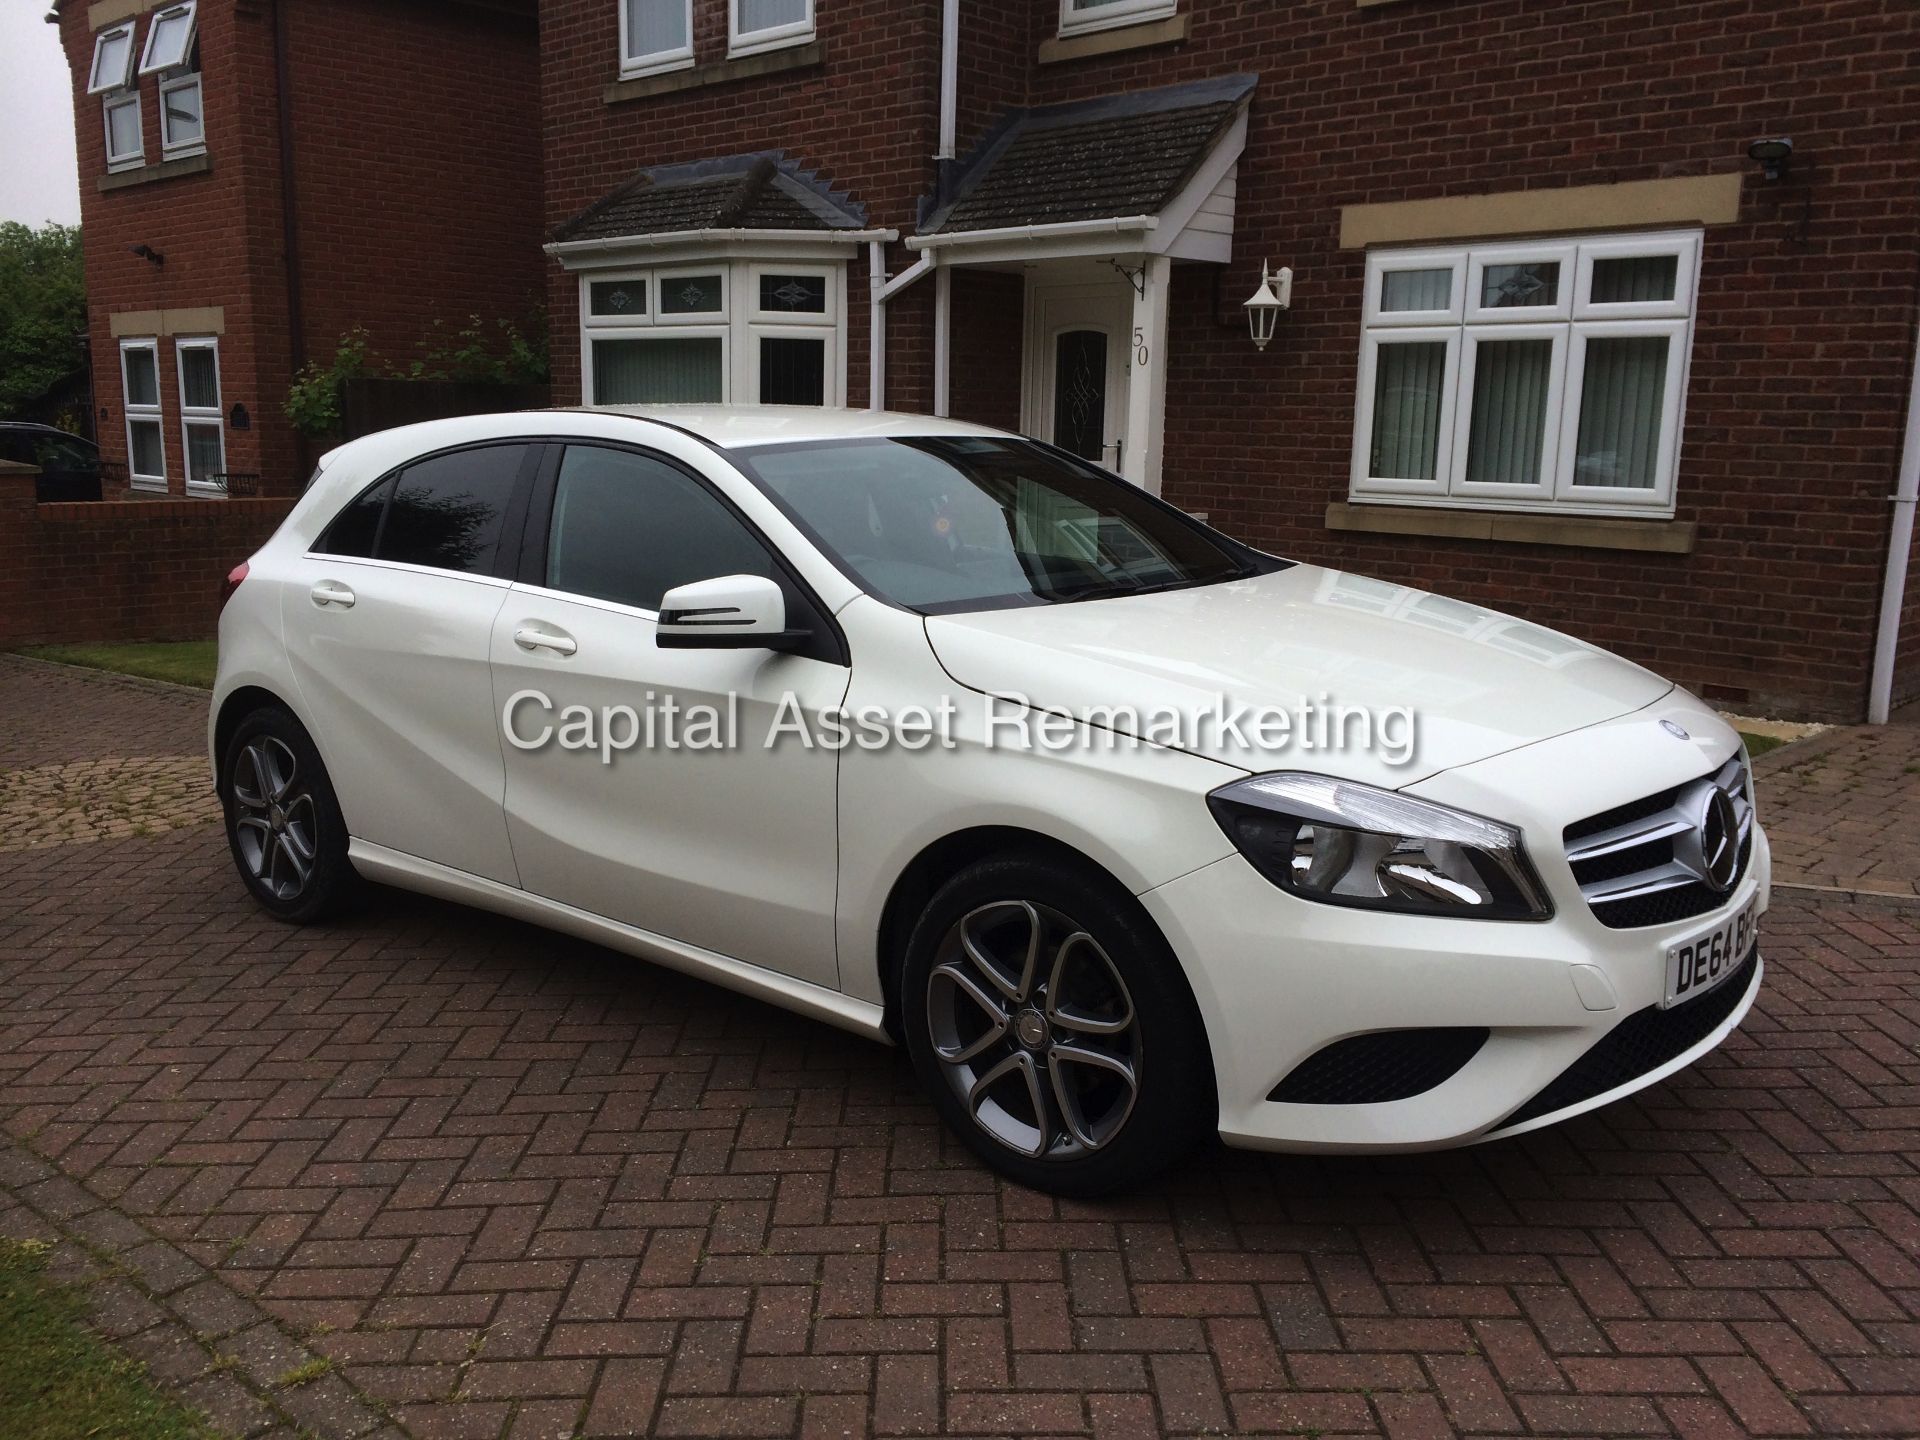 (On Sale) MERCEDES A180cdi "SPORT EDITION" (2015 MODEL) ONLY 25,000 MILES - SAT NAV -PARTIAL LEATHER